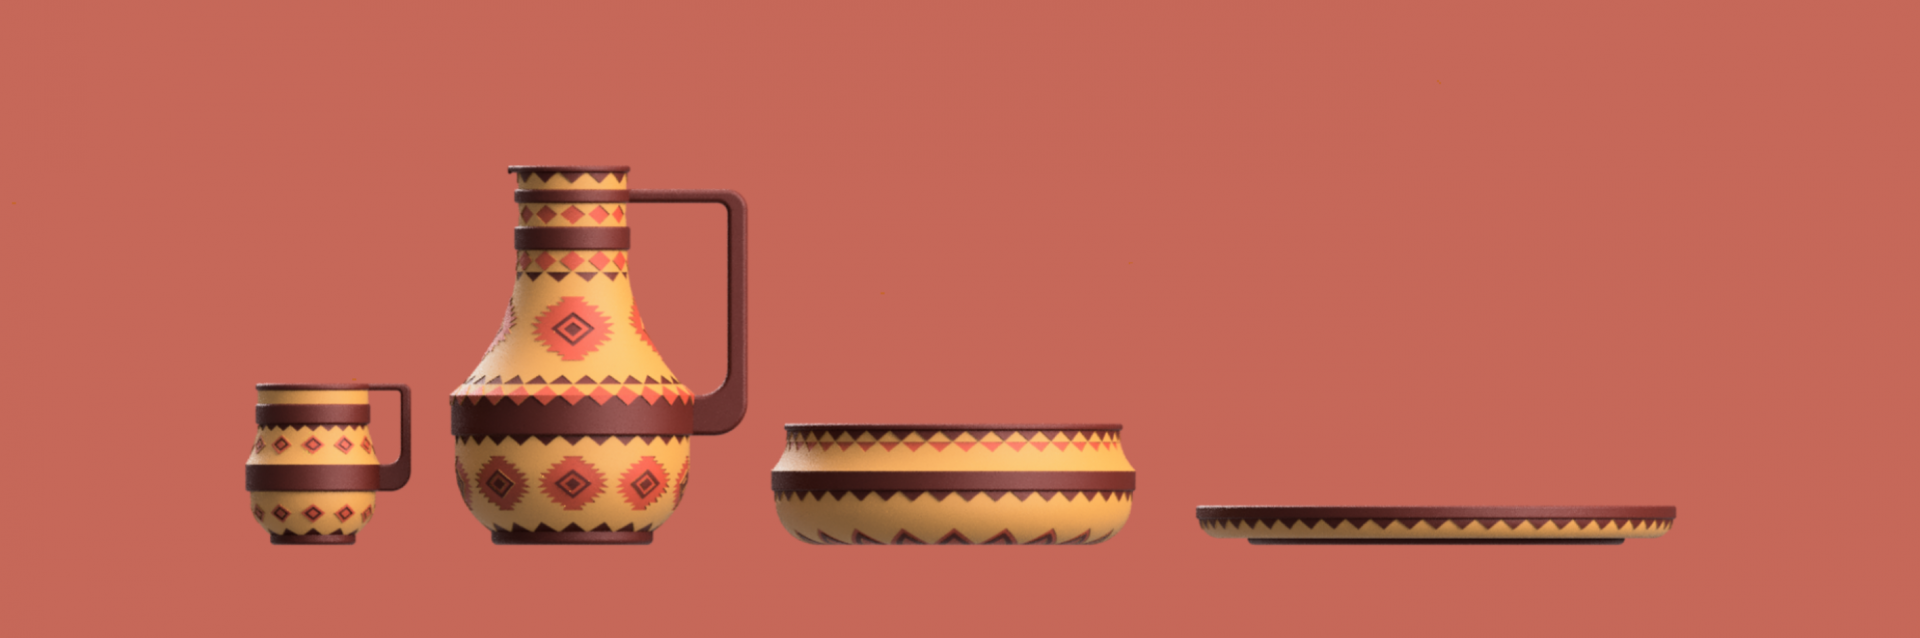 A render of a dish set with bright warm colors and Incan patterning. 